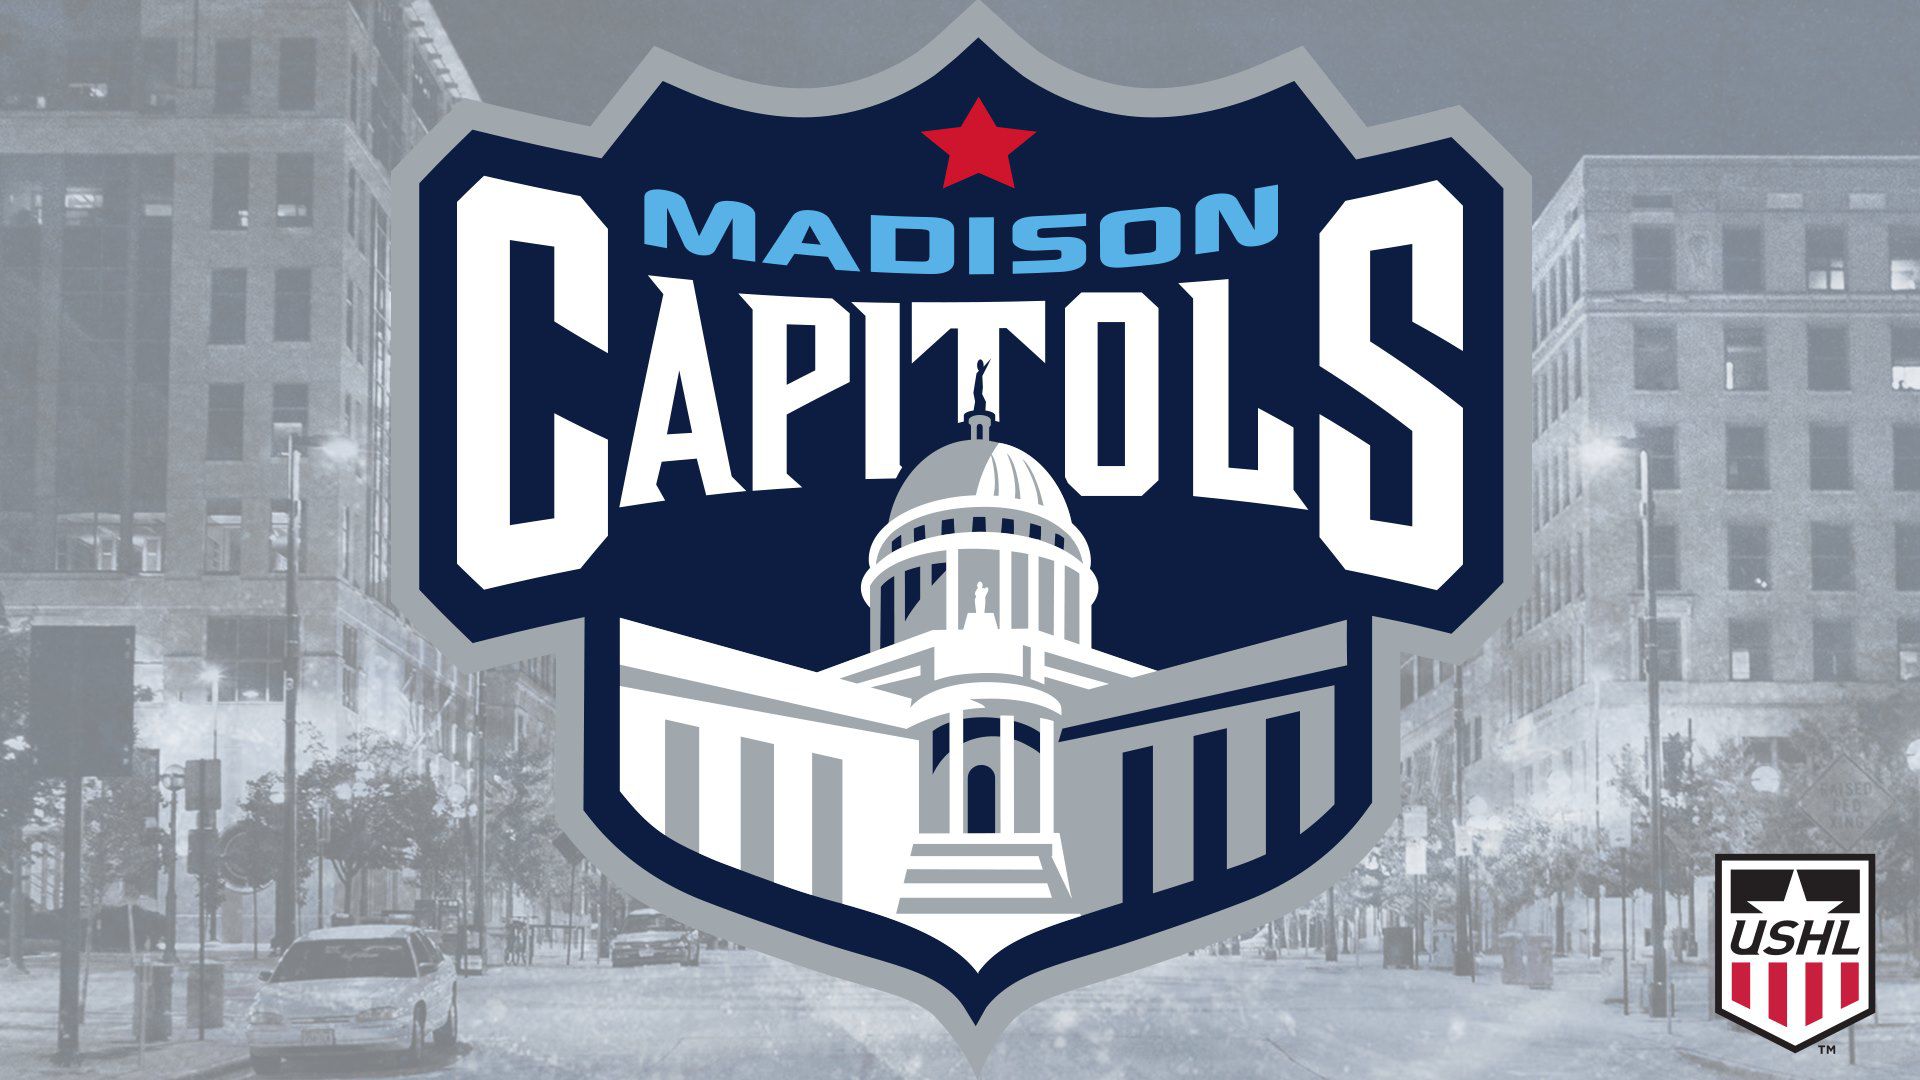 Madison Capitols will suspend operations for the 2020-21 season, Sports